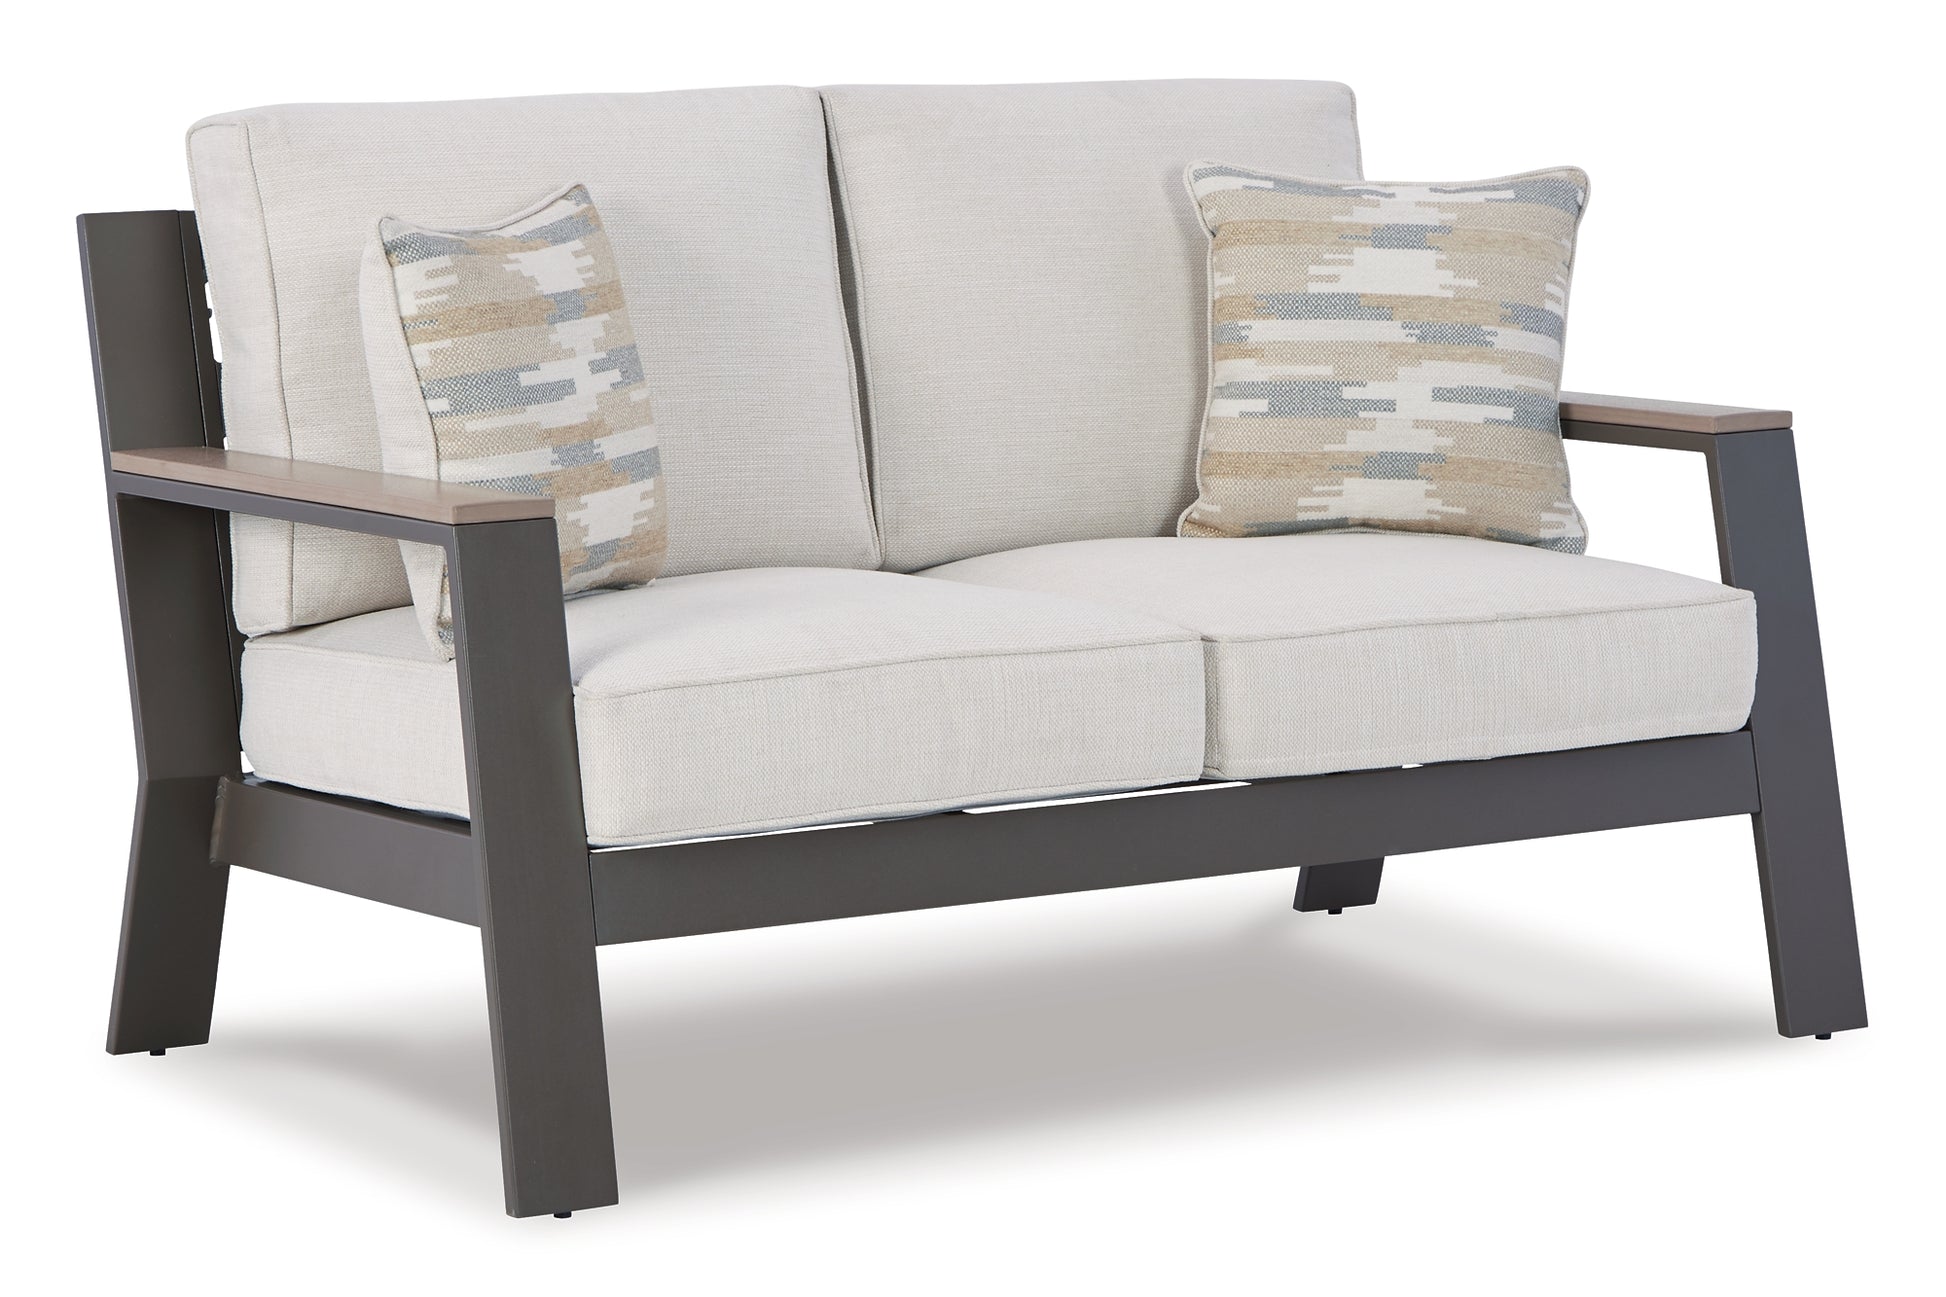 Tropicava Outdoor Sofa, Loveseat and Lounge Chair with Coffee Table Wilson Furniture (OH)  in Bridgeport, Ohio. Serving Moundsville, Richmond, Smithfield, Cadiz, & St. Clairesville